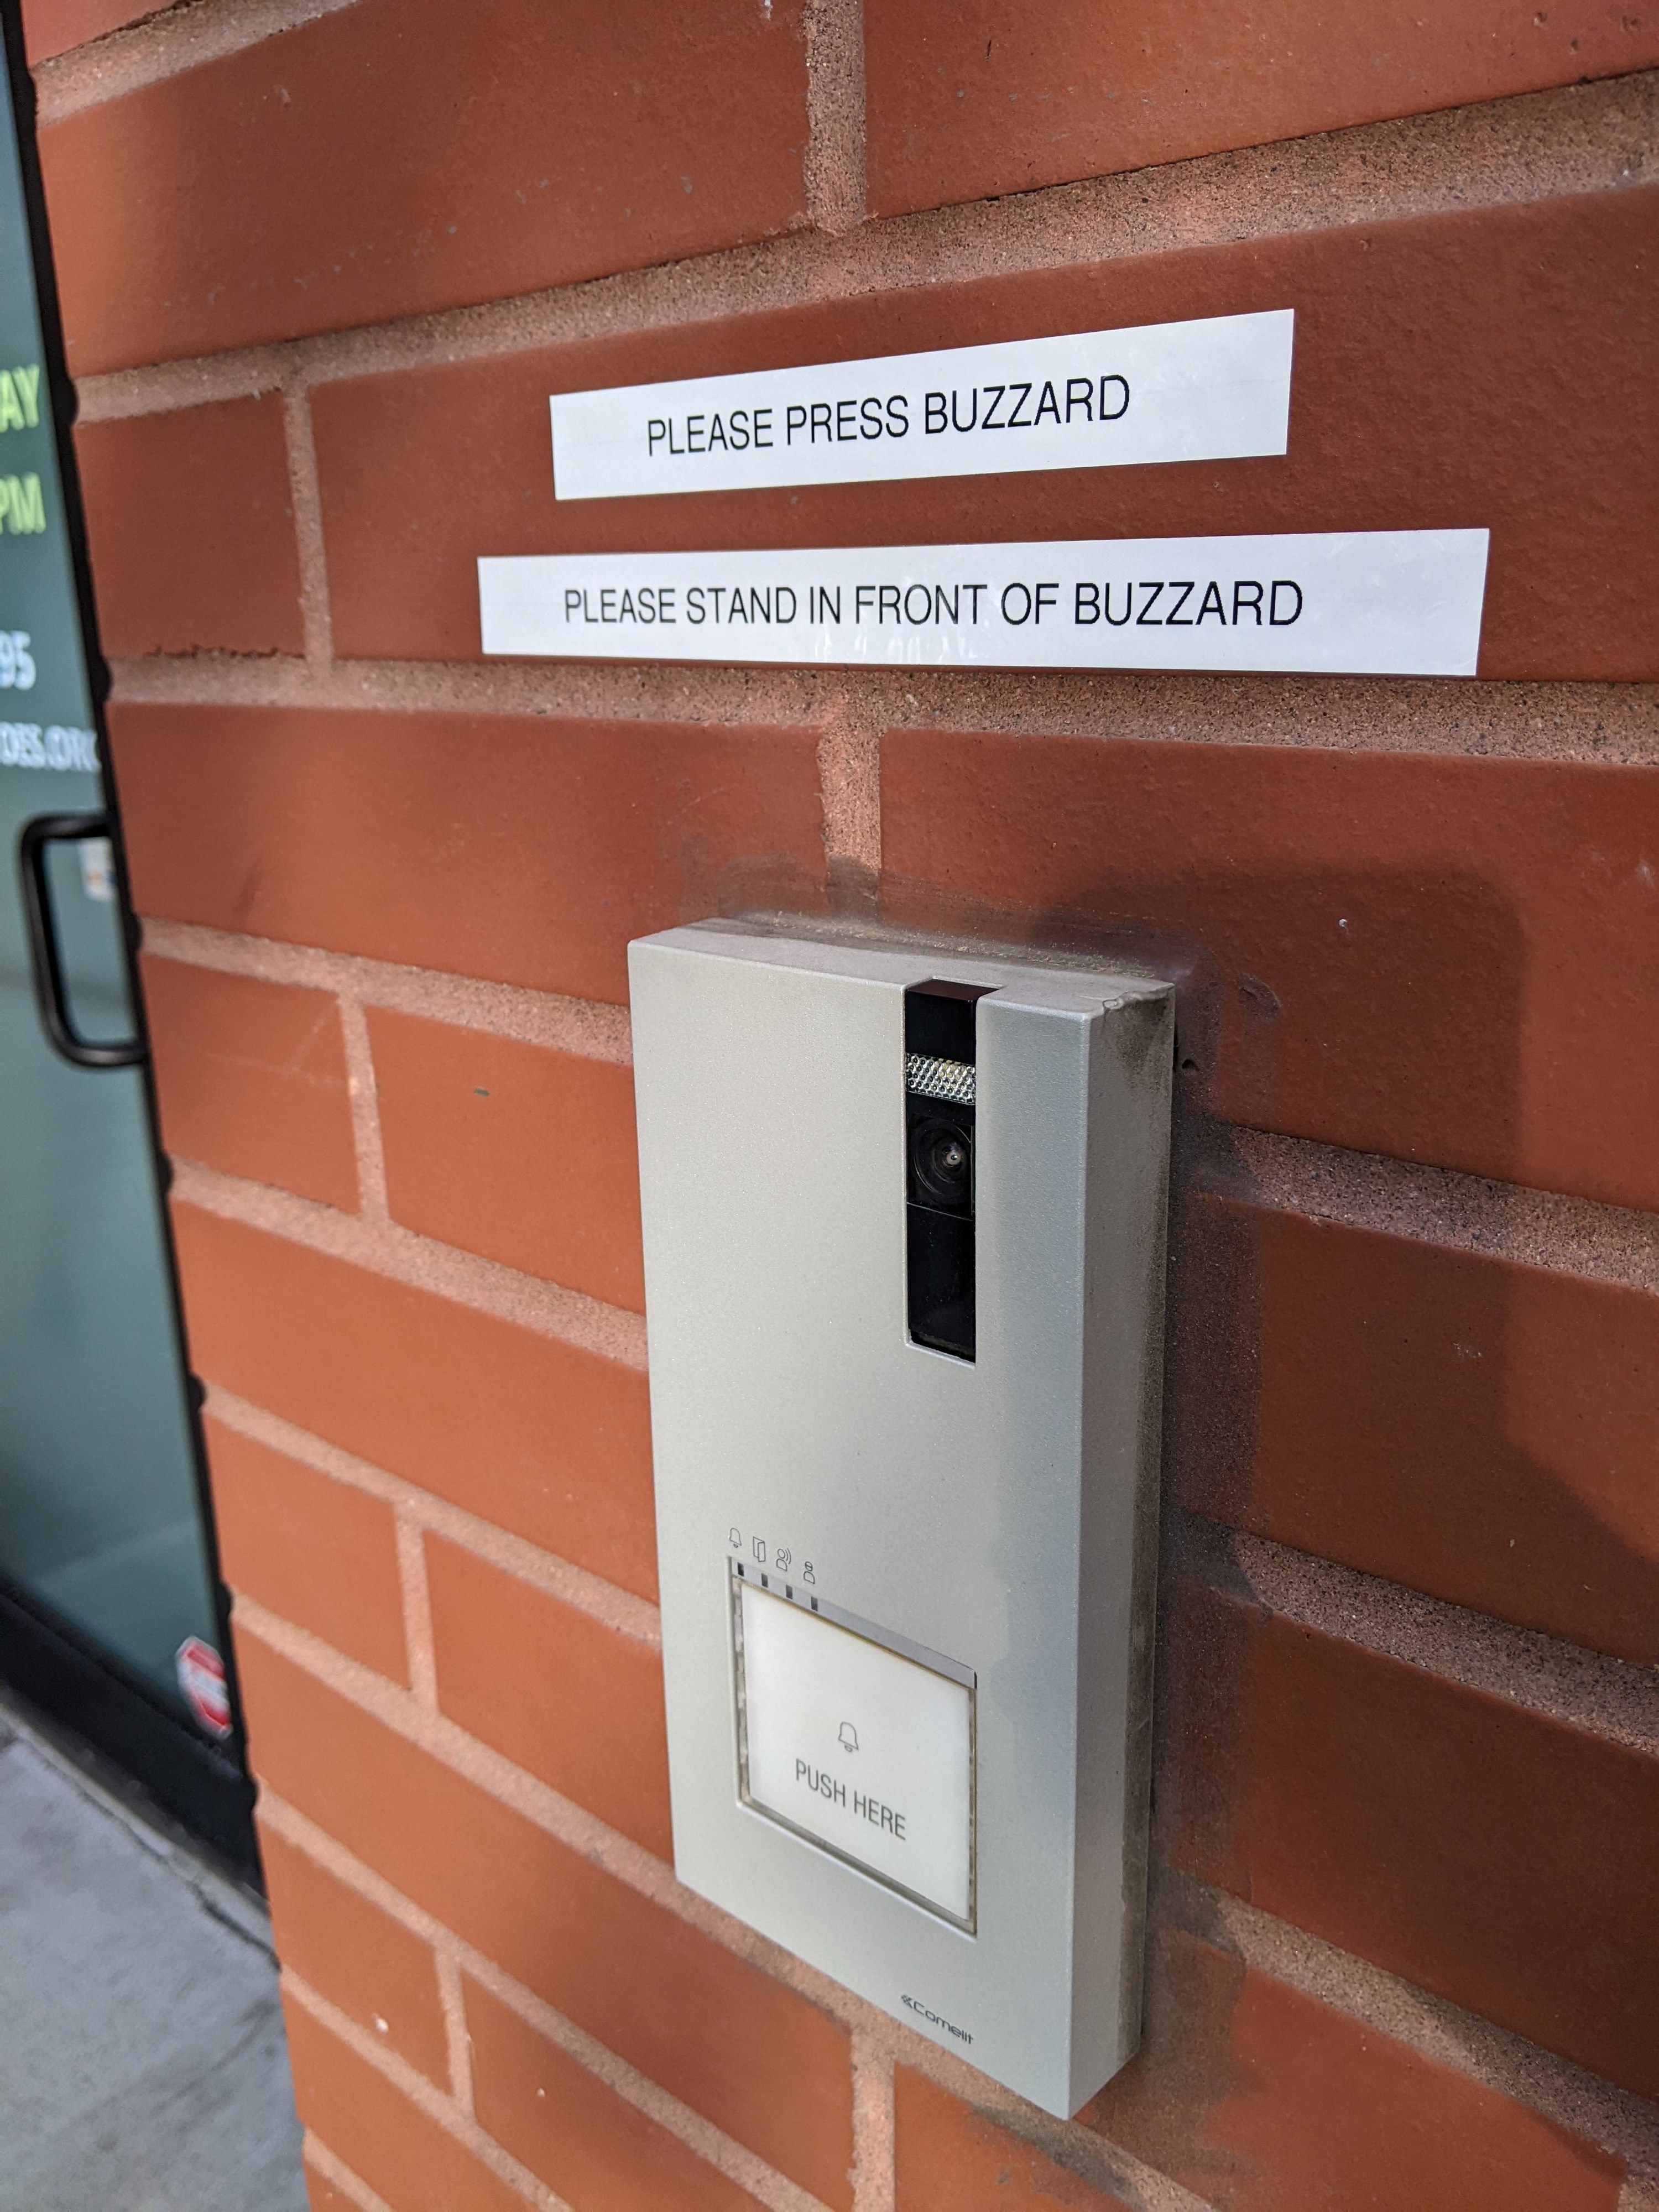 A note telling people to press the &quot;buzzard&quot; instead of the buzzer